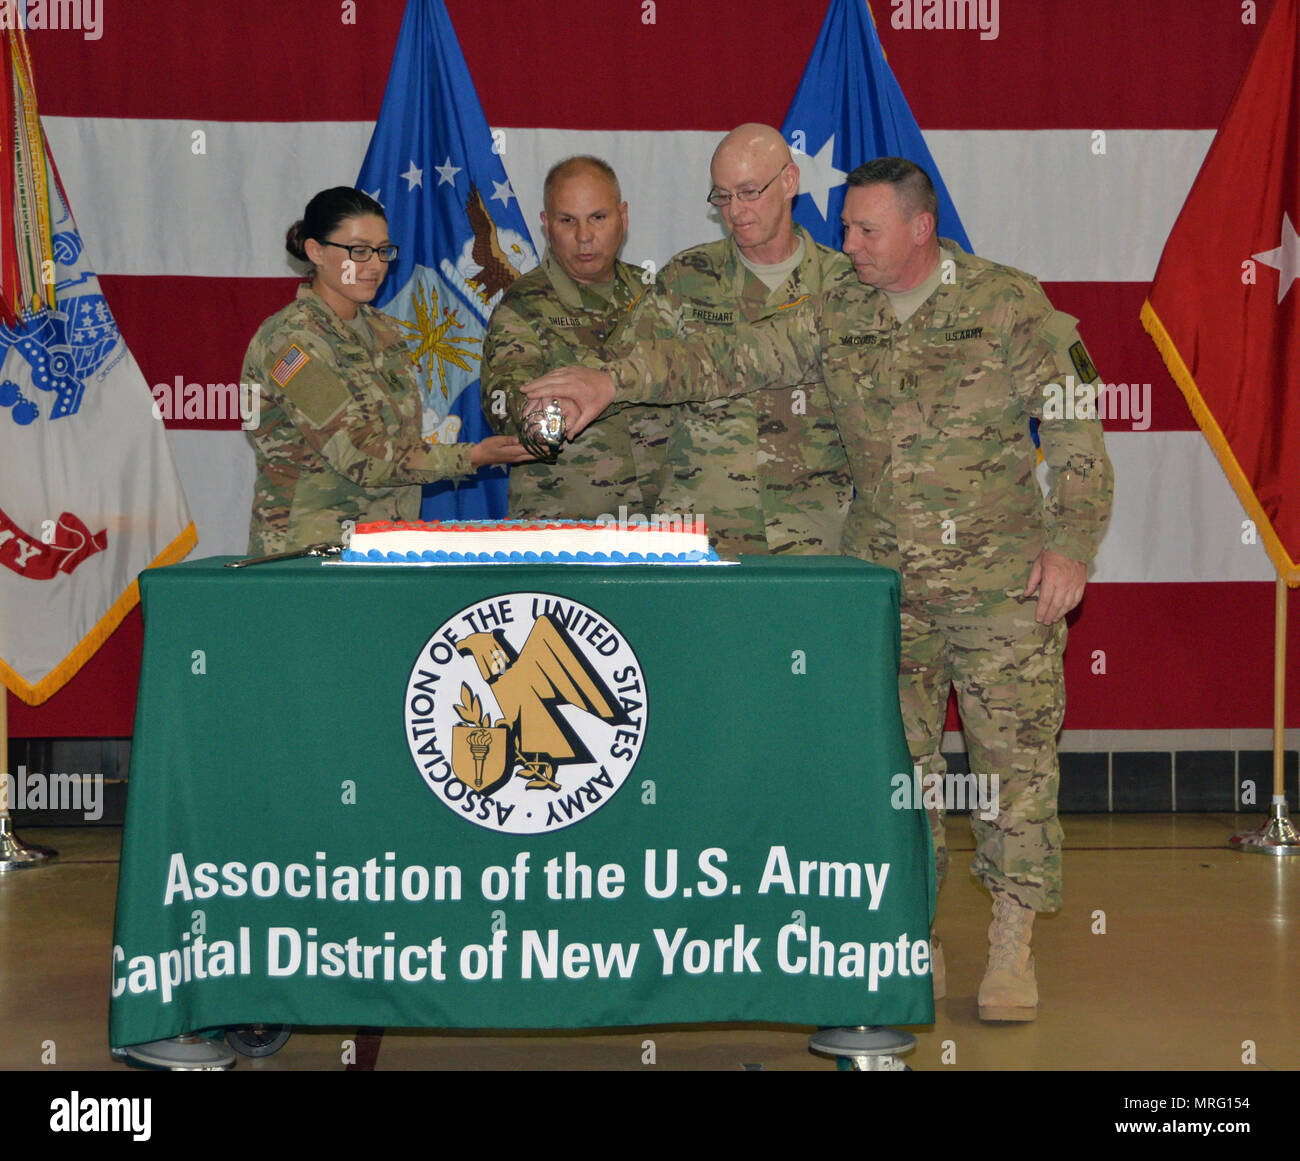 Youngest and oldest Soldiers present cut the birthday cake during Army Birthday ceremonies at New York National Guard Headquarters in Latham, N.Y. on June 17, 2017. Cutting the cake are, from left, PFC Jade Richards, the youngest Solldier, Brig. Gen. Raymond Shields, commander of the New York Army National Guard, Col. James Freehart, the oldest Soldier present, and Chief Warrant Officer 5 Gordon Jacobs, another Army veteran.New York Army National Guard members celebrated the 242nd Birthday of the United States Army. (U.S. Army National Guard photo by: Sgt. Major Corine Lombardo) Stock Photo